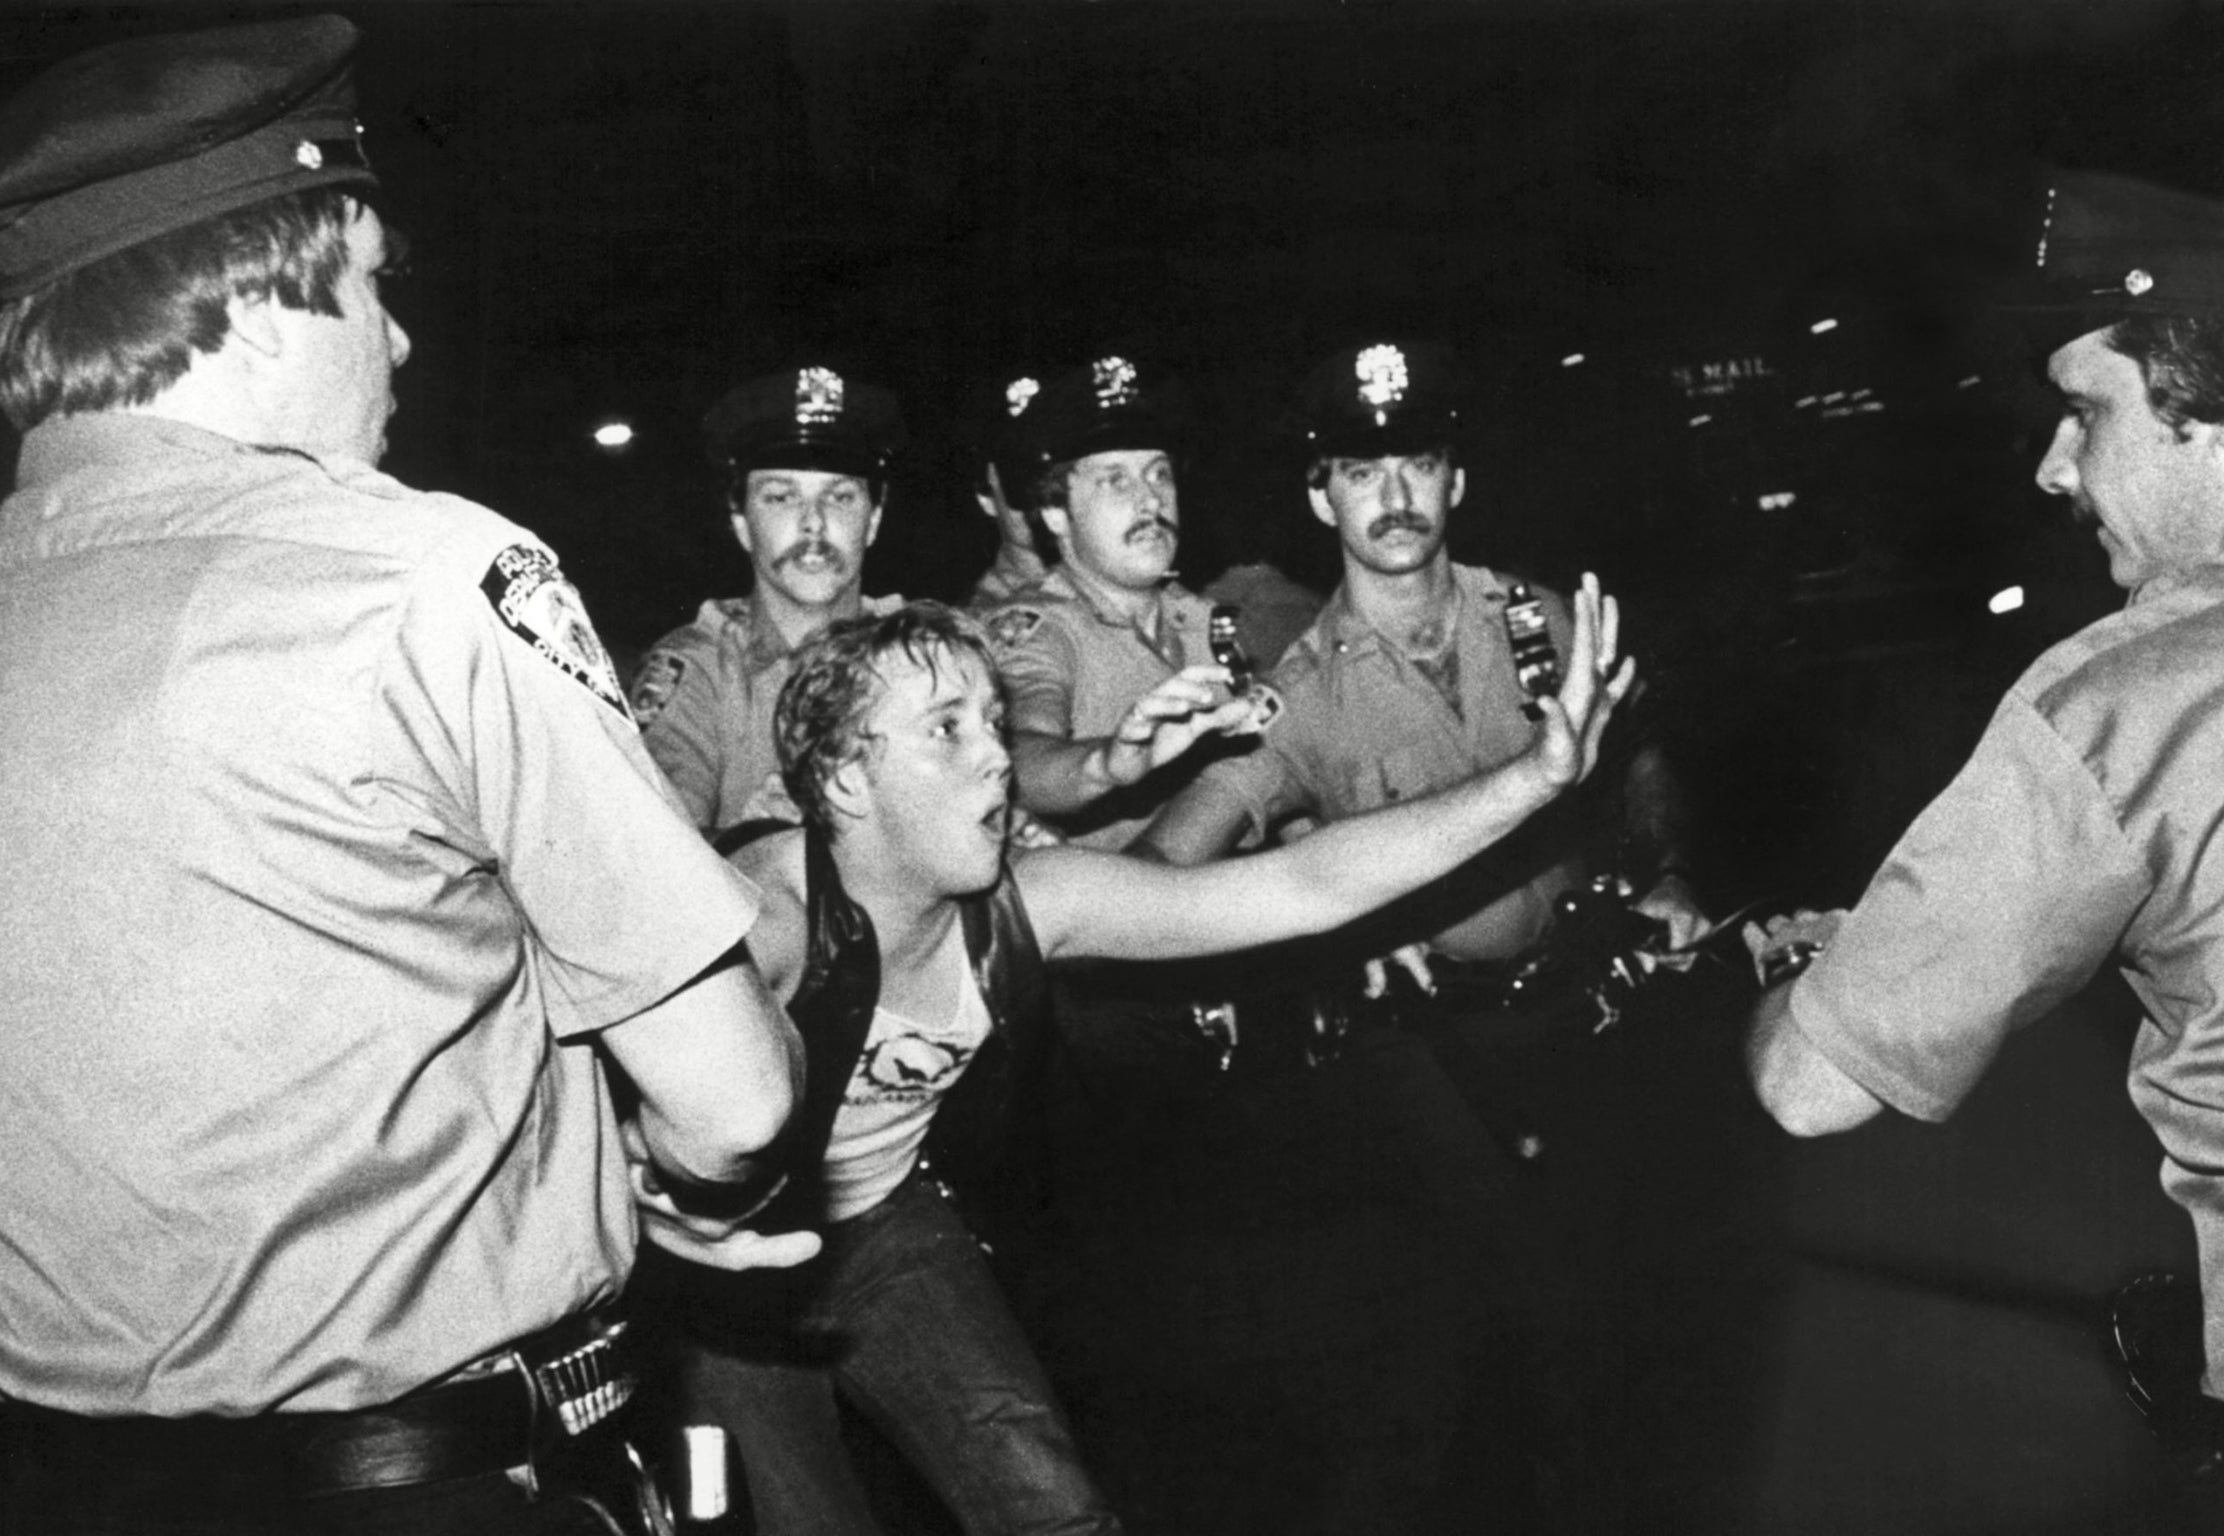 The Stonewall riots of 1969 are widely considered to be the single most important event leading to the modern US gay rights movement